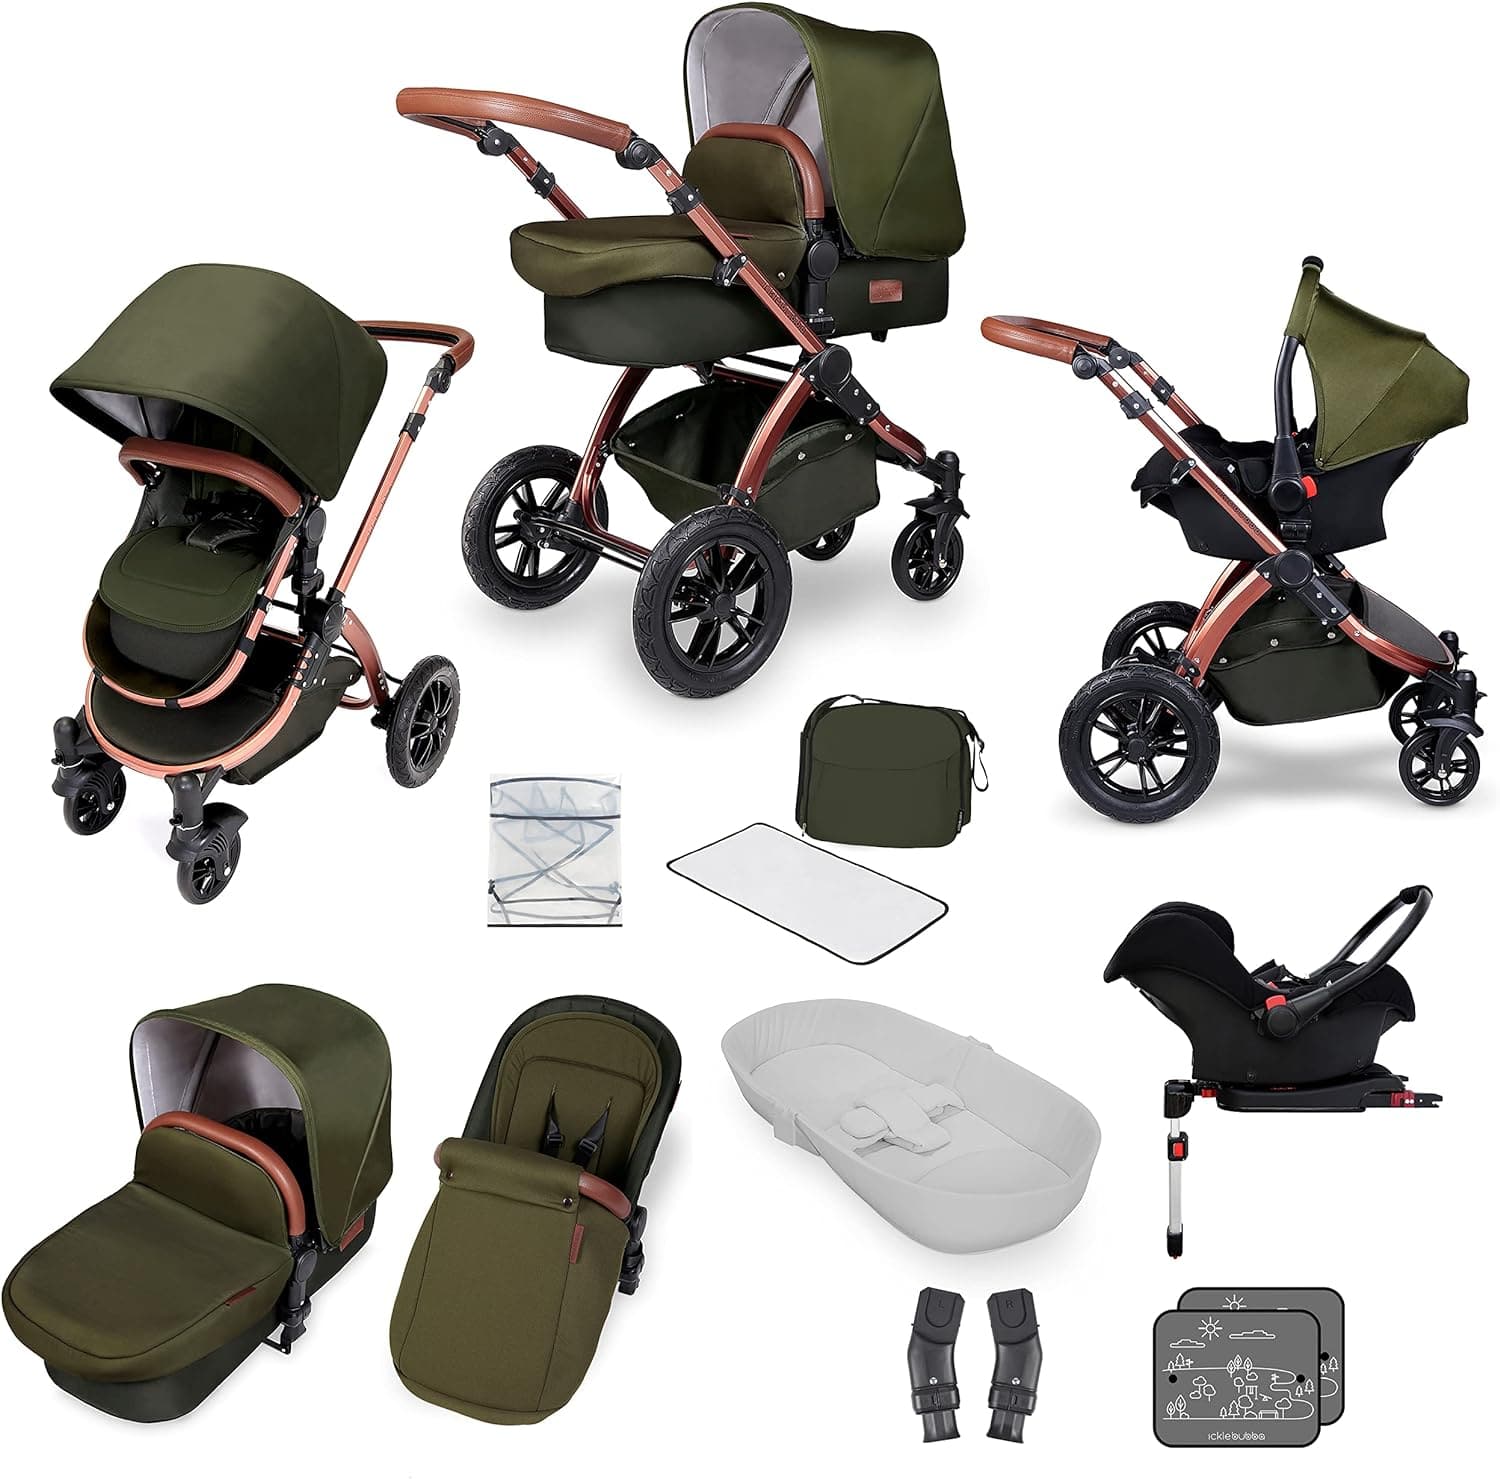 Ickle bubba Stomp V4 All in One Travel System With Isofix Base (Galaxy) - Bronze / woodland - For Your Little One